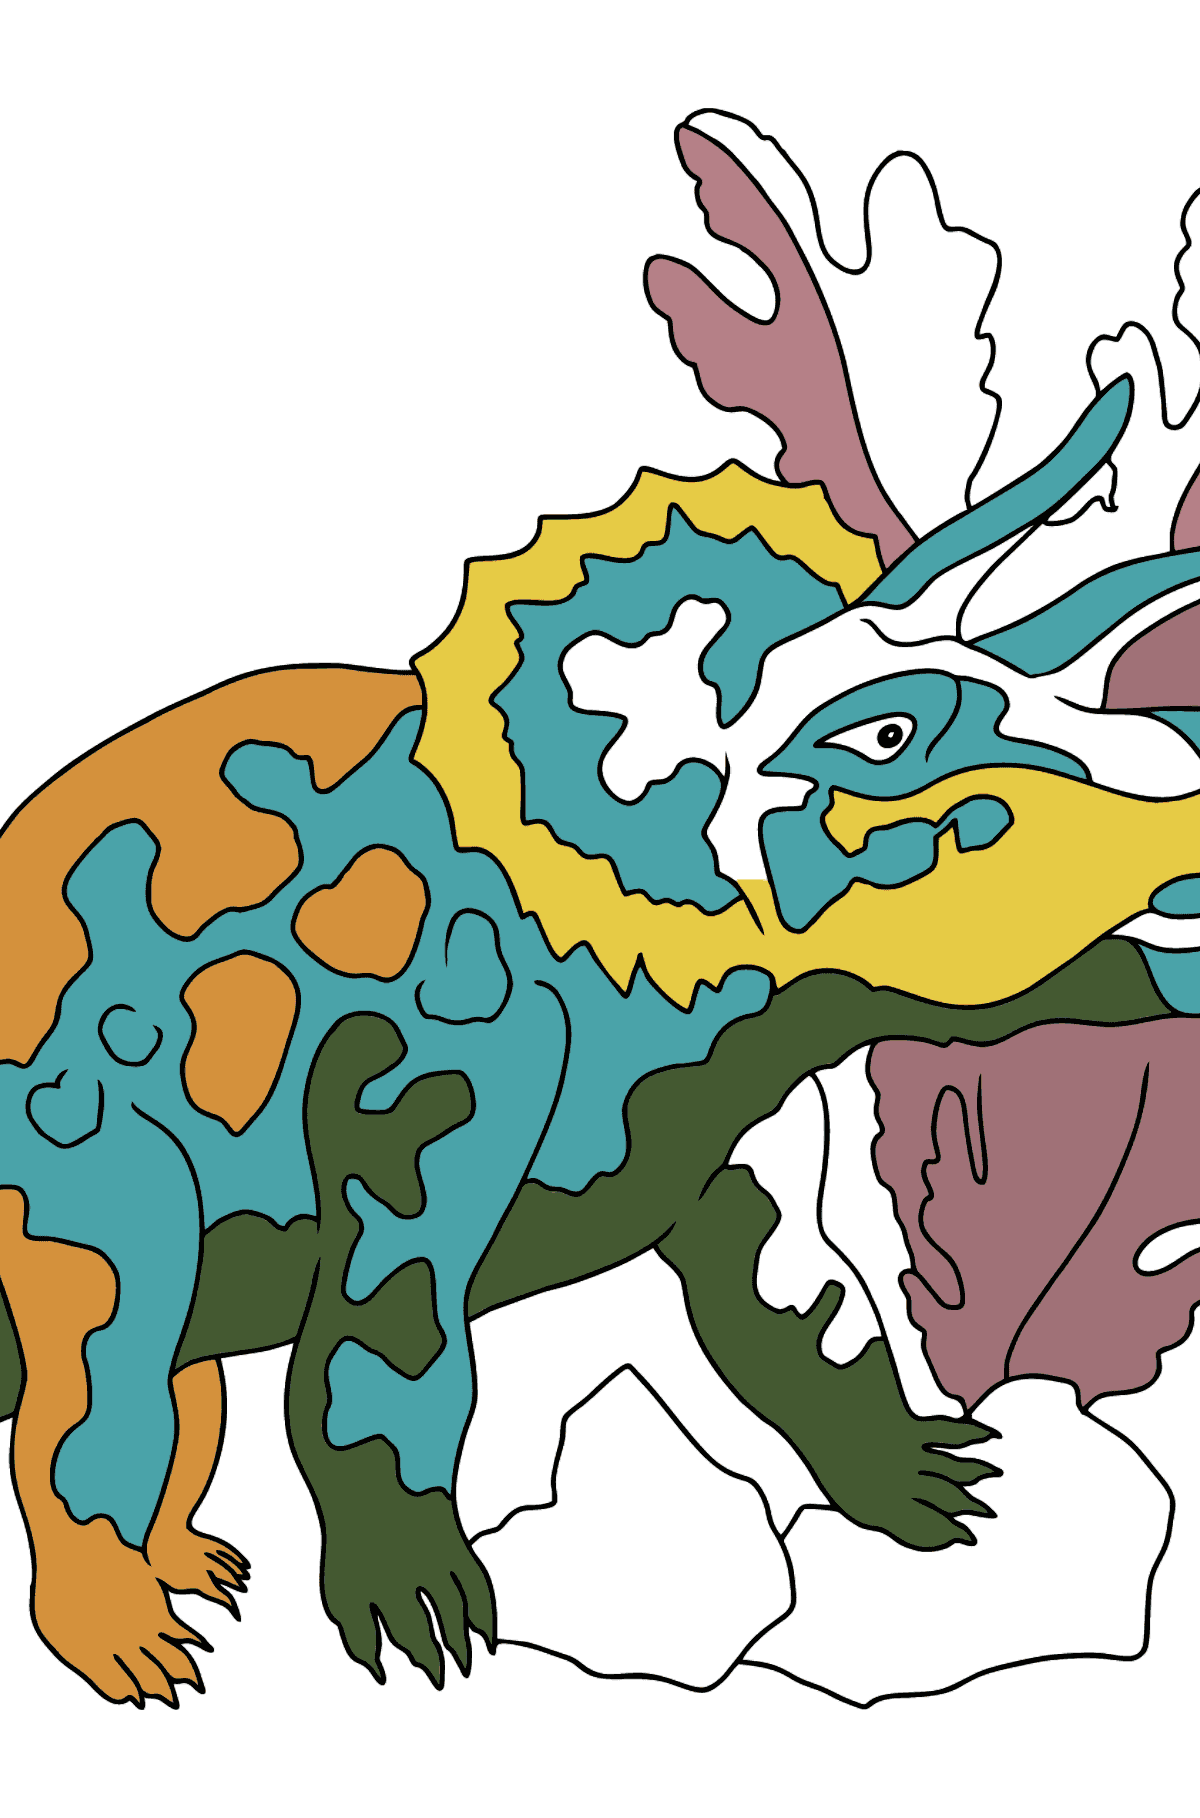 Coloring Page - Triceratops - A Peaceful Horned Dinosaur - Coloring Pages for Kids